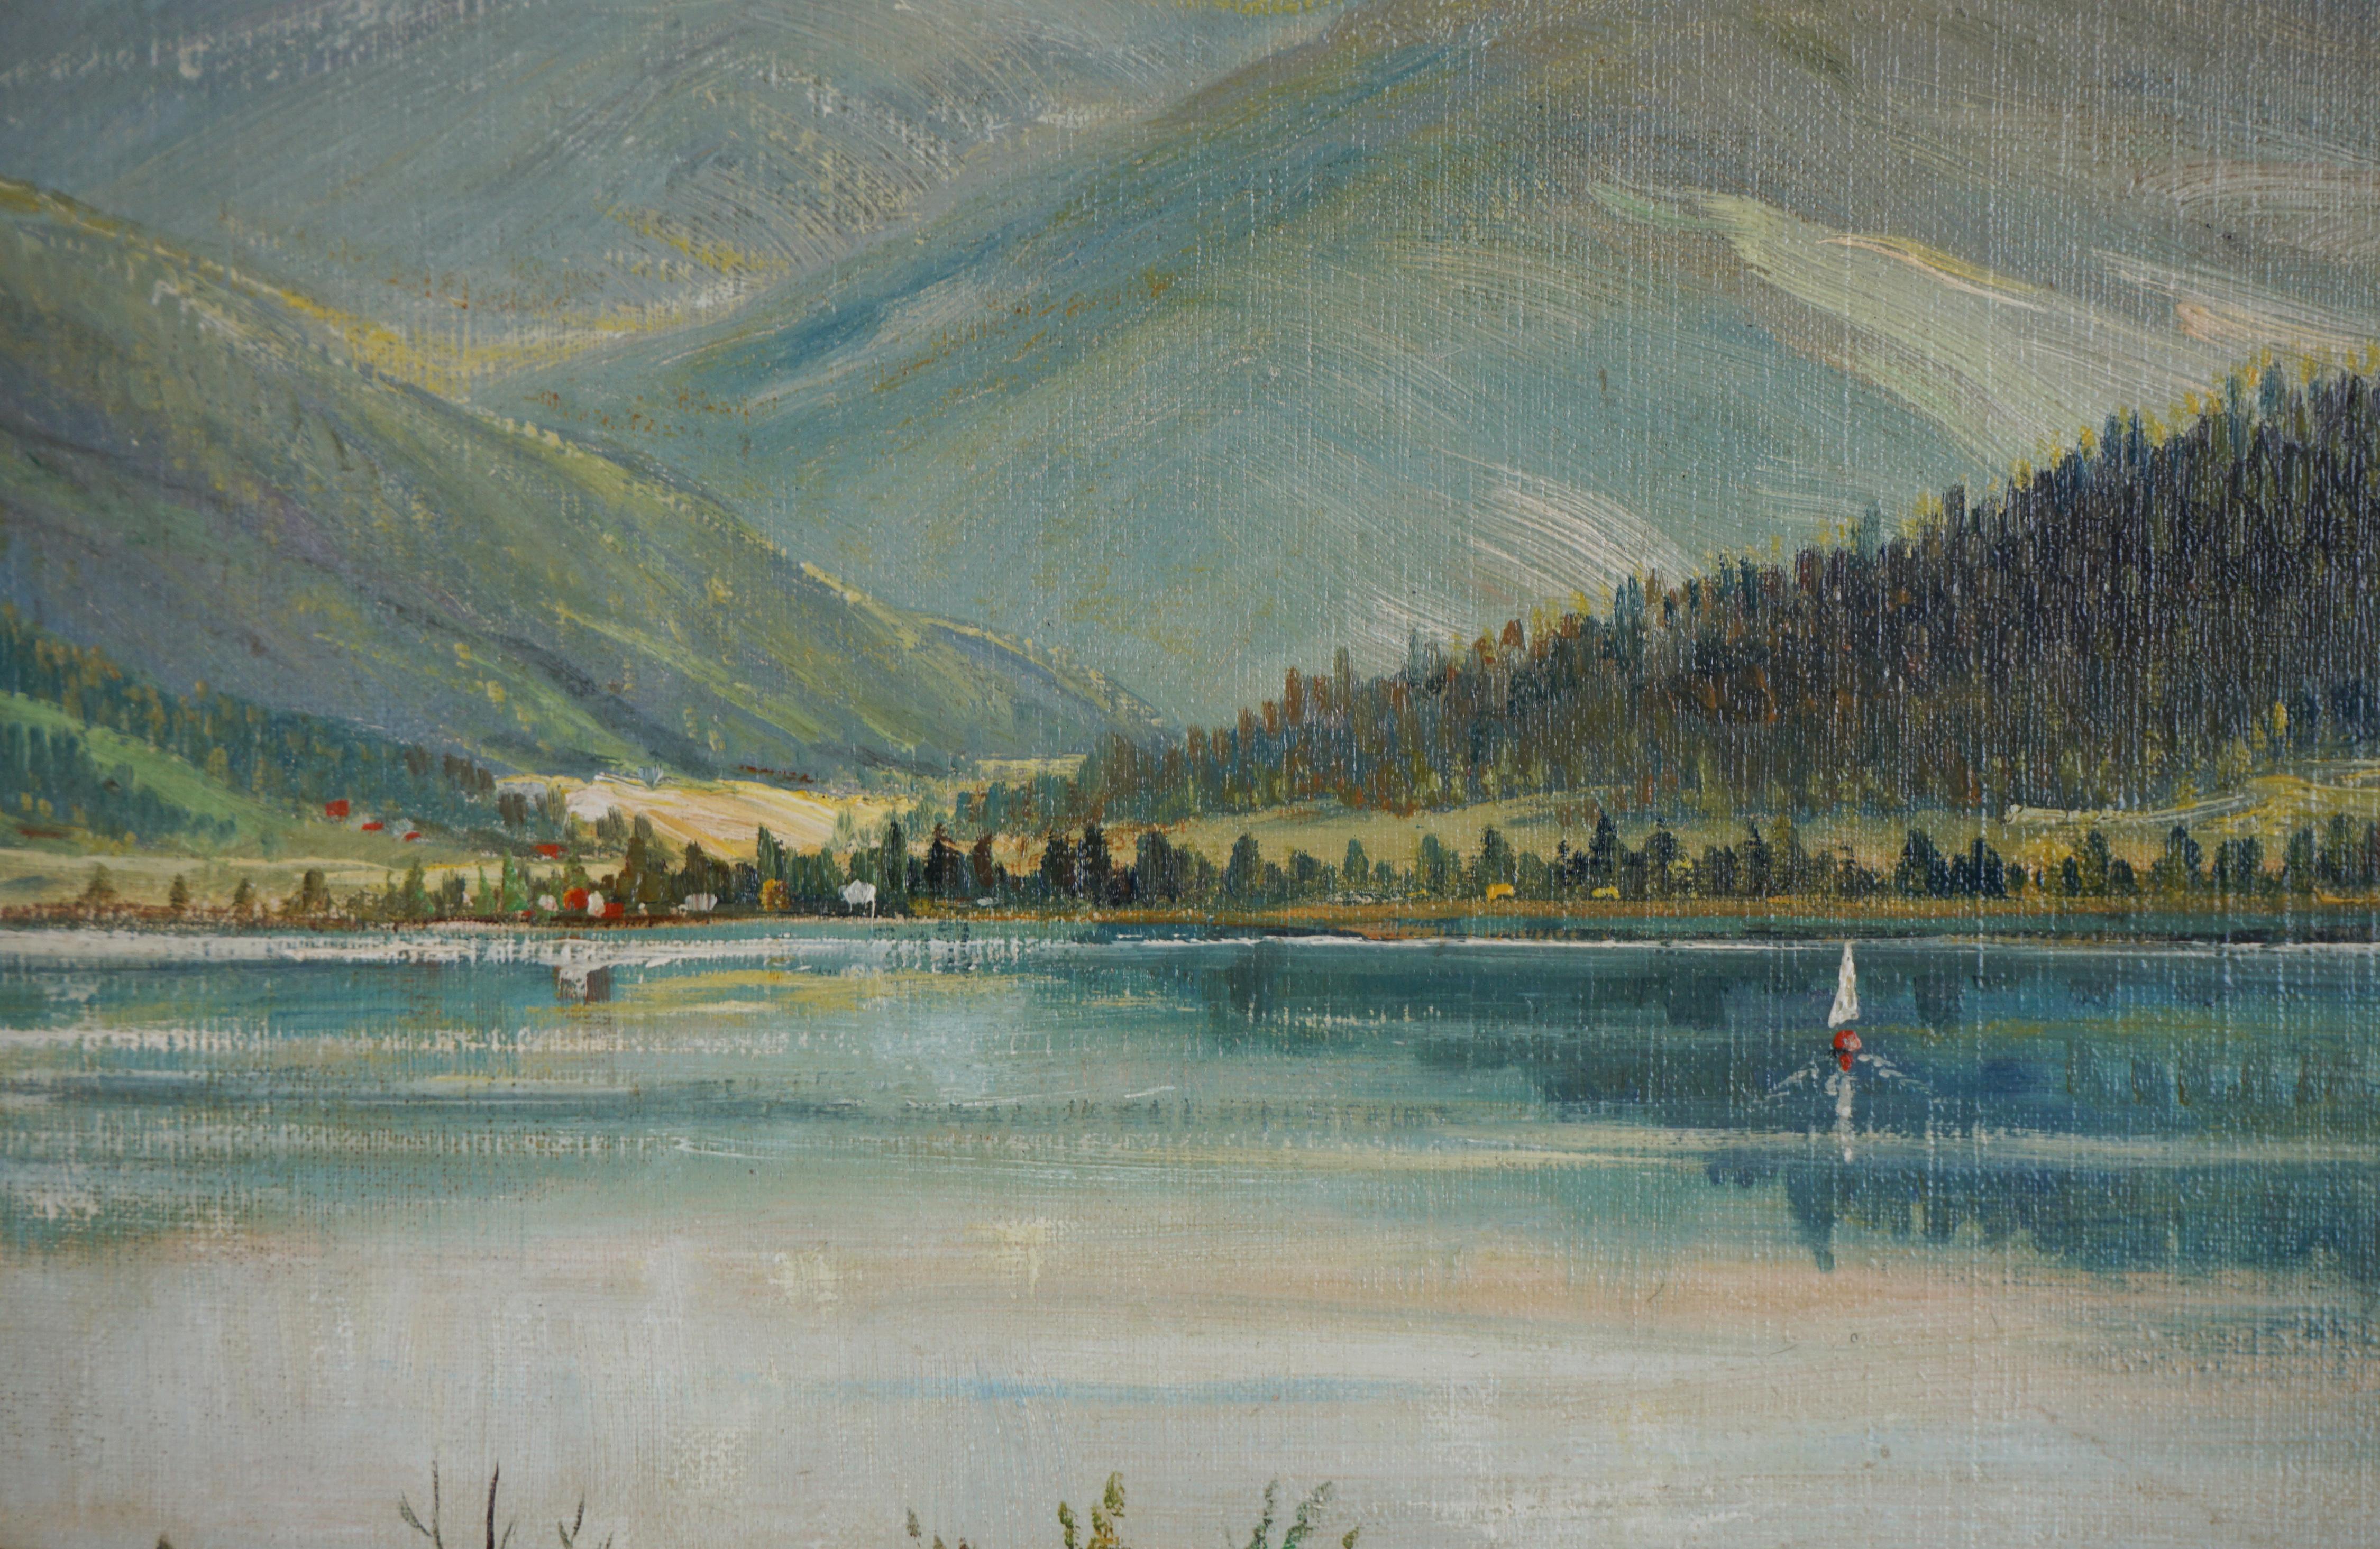 Mid Century Lake Berryessa Napa, California Landscape - Painting by A. Schaffner